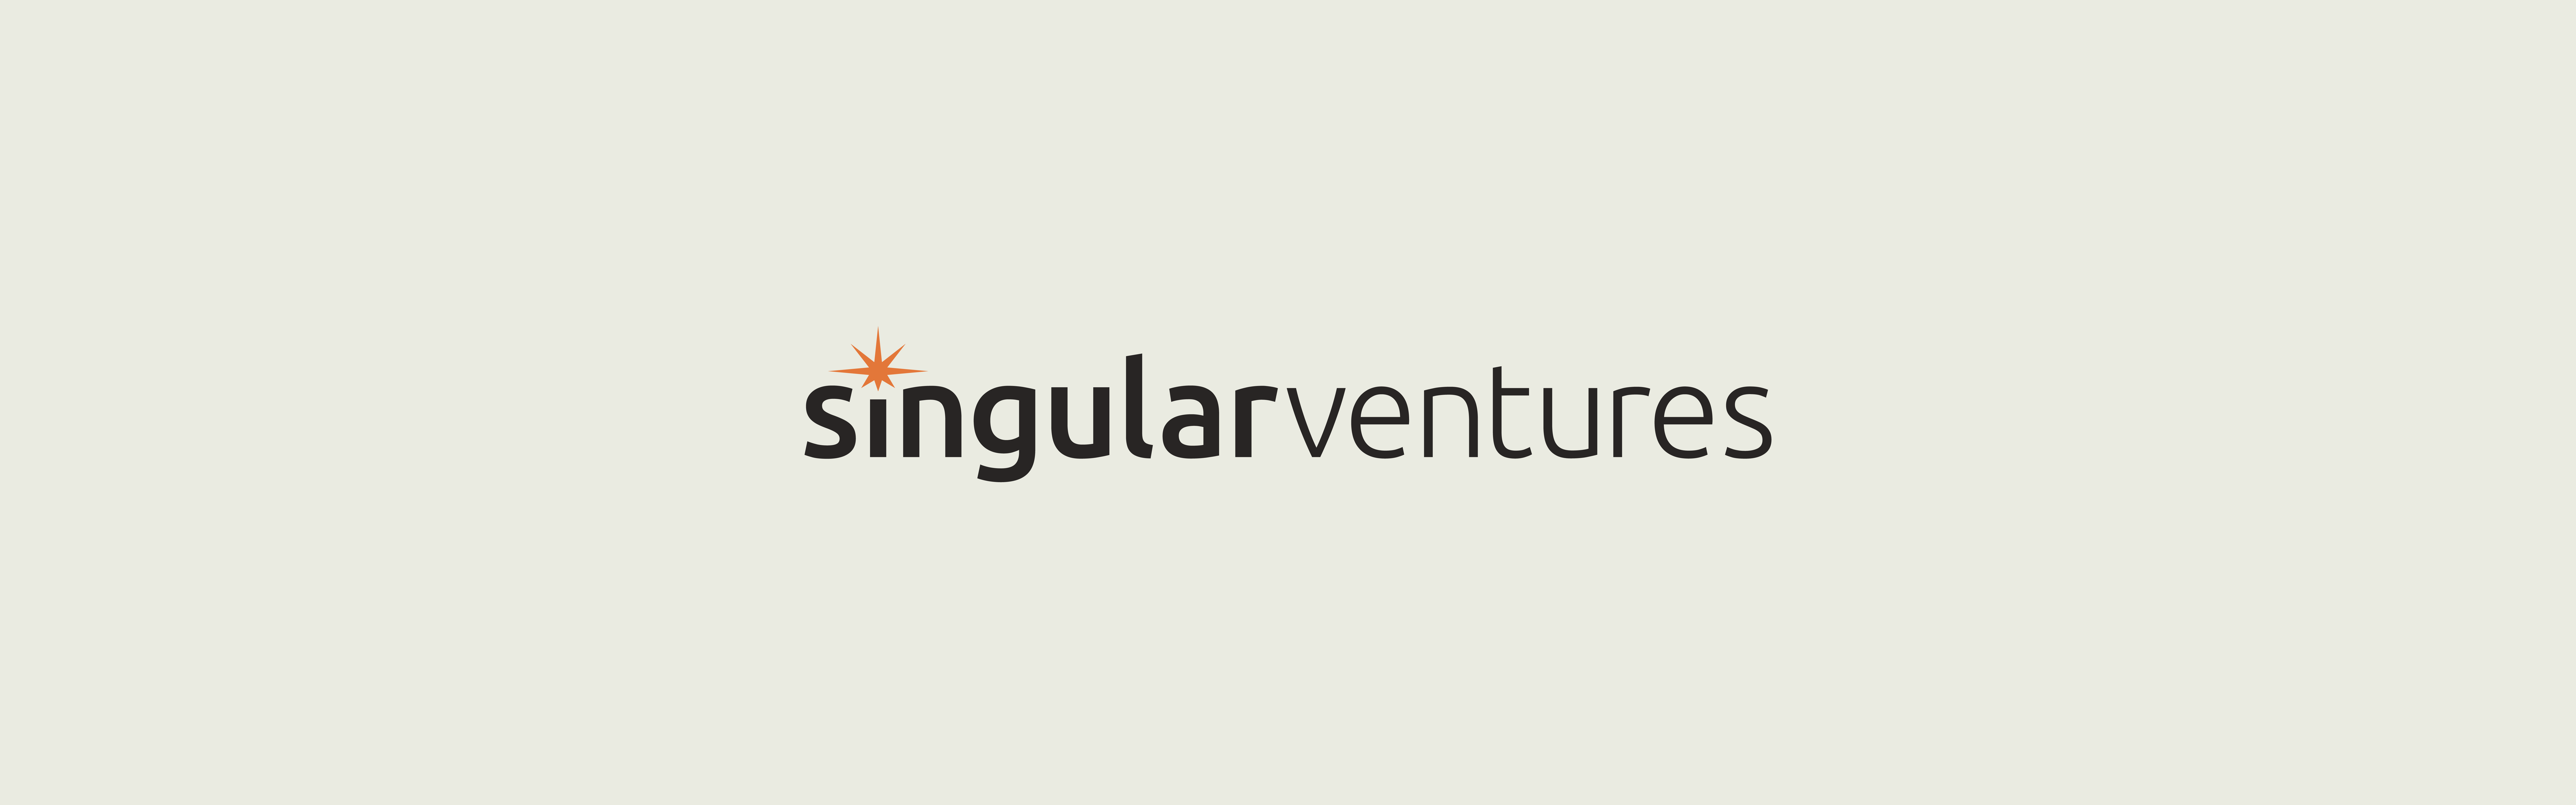 This image displays the logo of "Singular Ventures," featuring a black lowercase sans-serif typeface with an orange asterisk-like symbol above the letter 'i'.